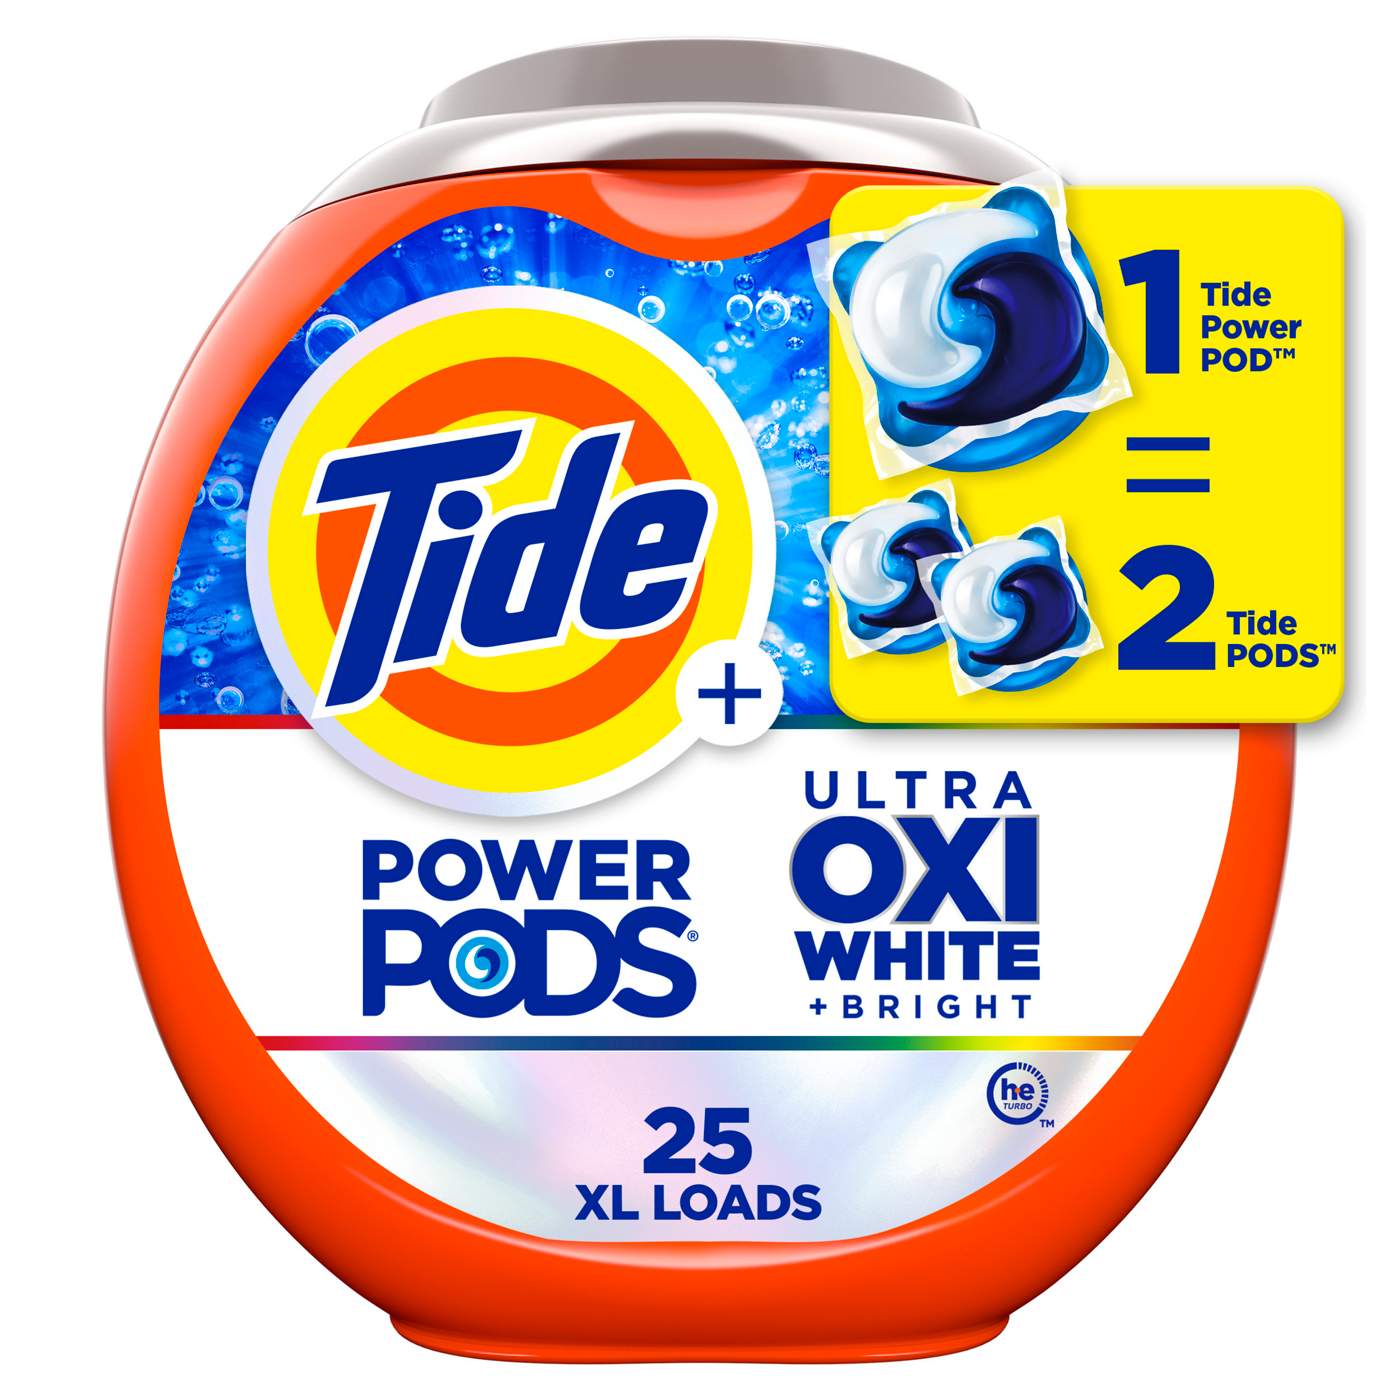 Tide Power PODS Ultra Oxi White & Bright Laundry Detergent Pacs; image 1 of 9